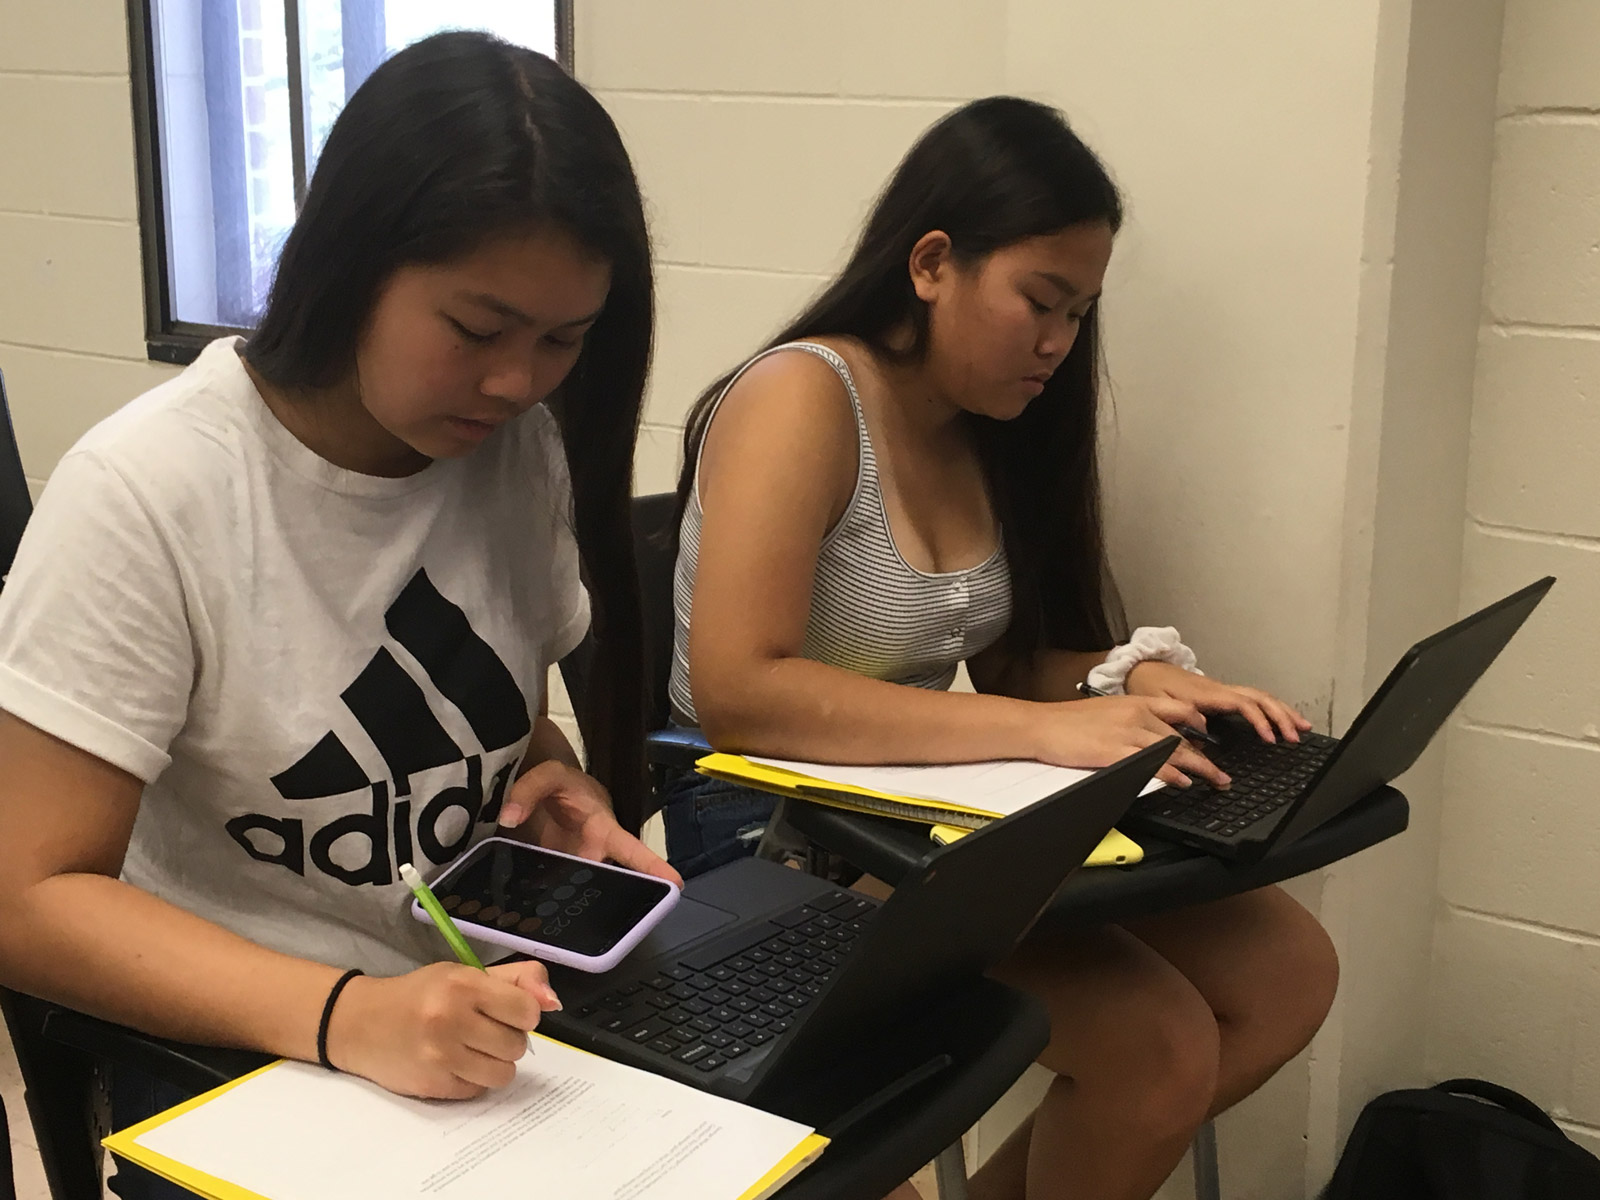 Students work on homework with calculator